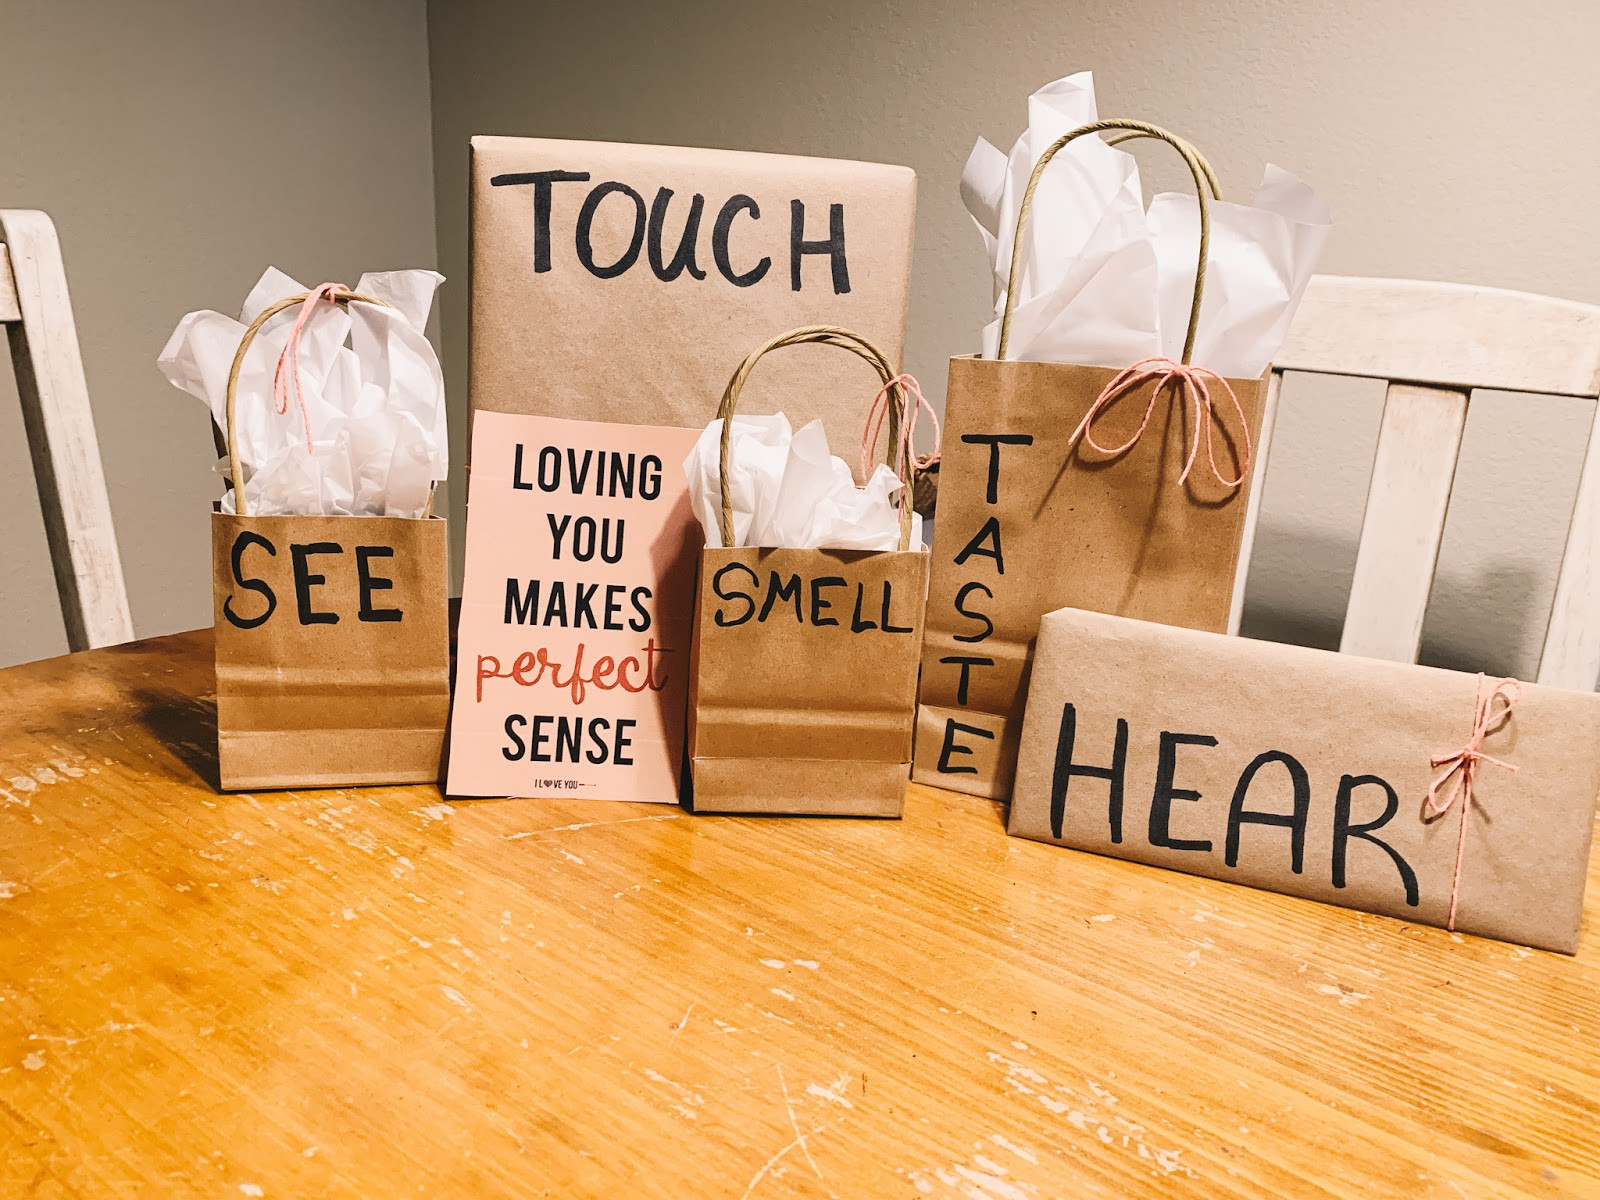 Creative Valentine Day Gift Ideas For Her
 The 5 Senses Valentines Day Gift Ideas for Him & Her